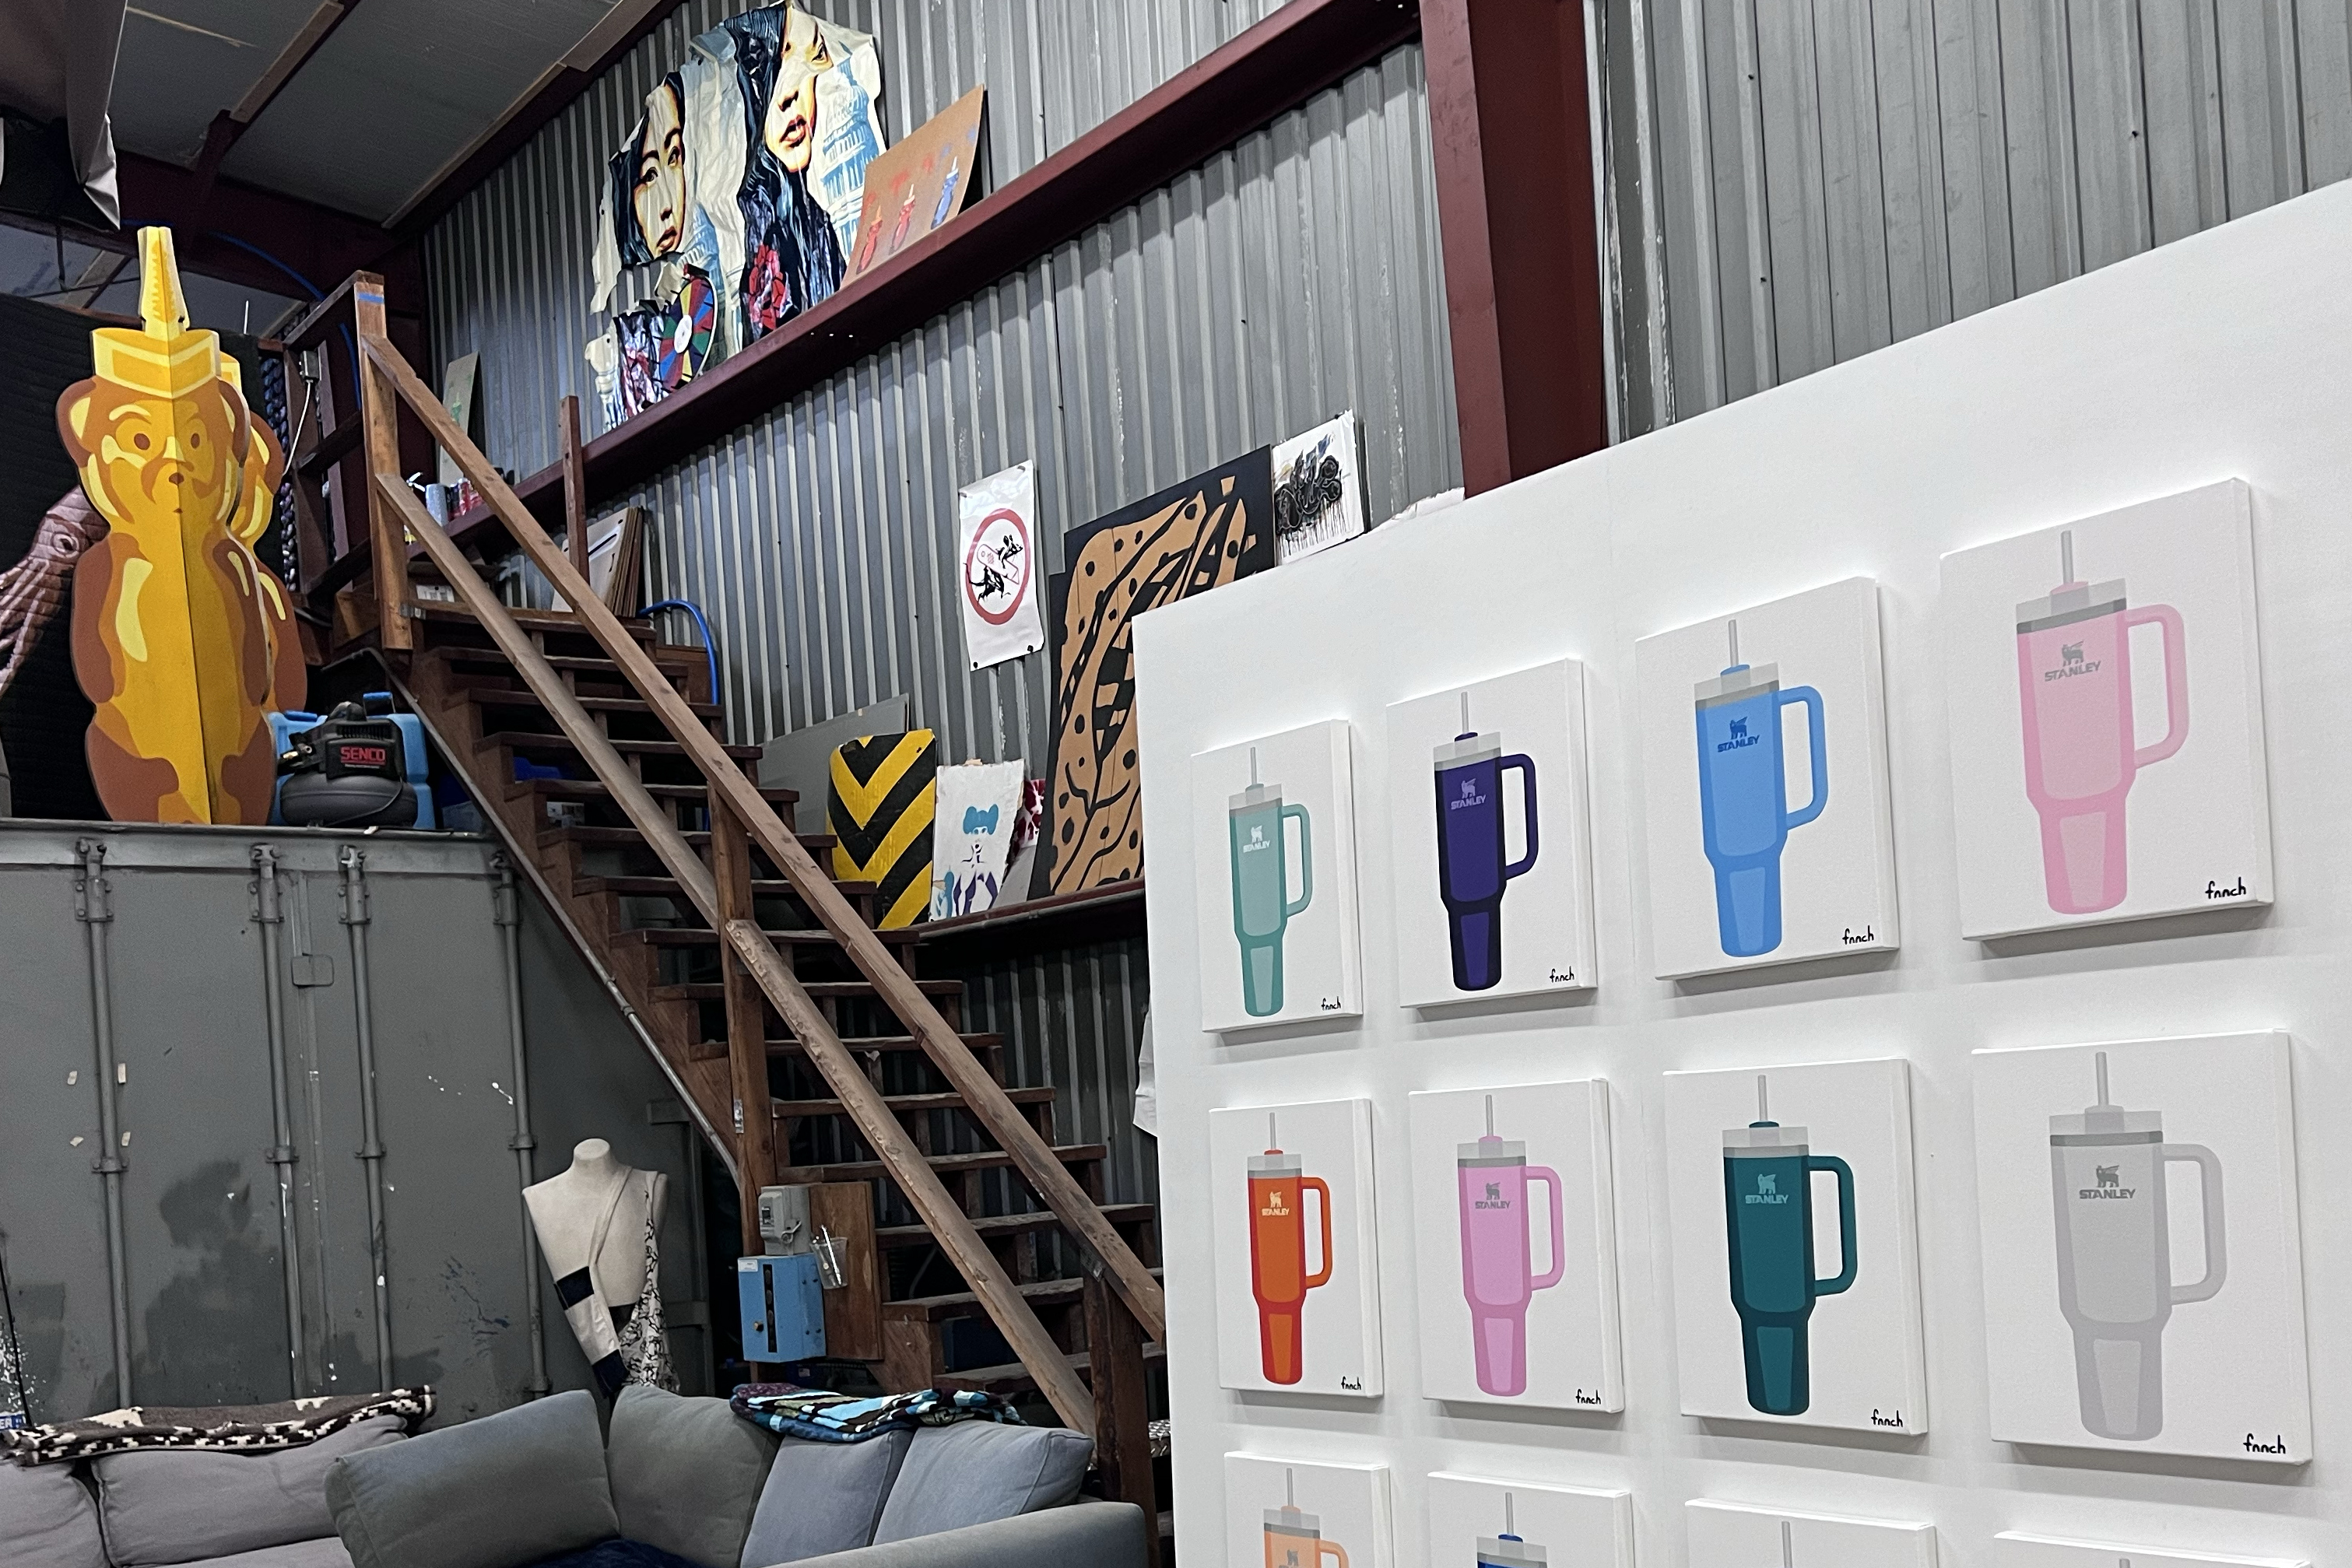 An eclectic room with artwork, colorful kettle illustrations on white canvases, a staircase, and a couch, all under a corrugated metal ceiling.